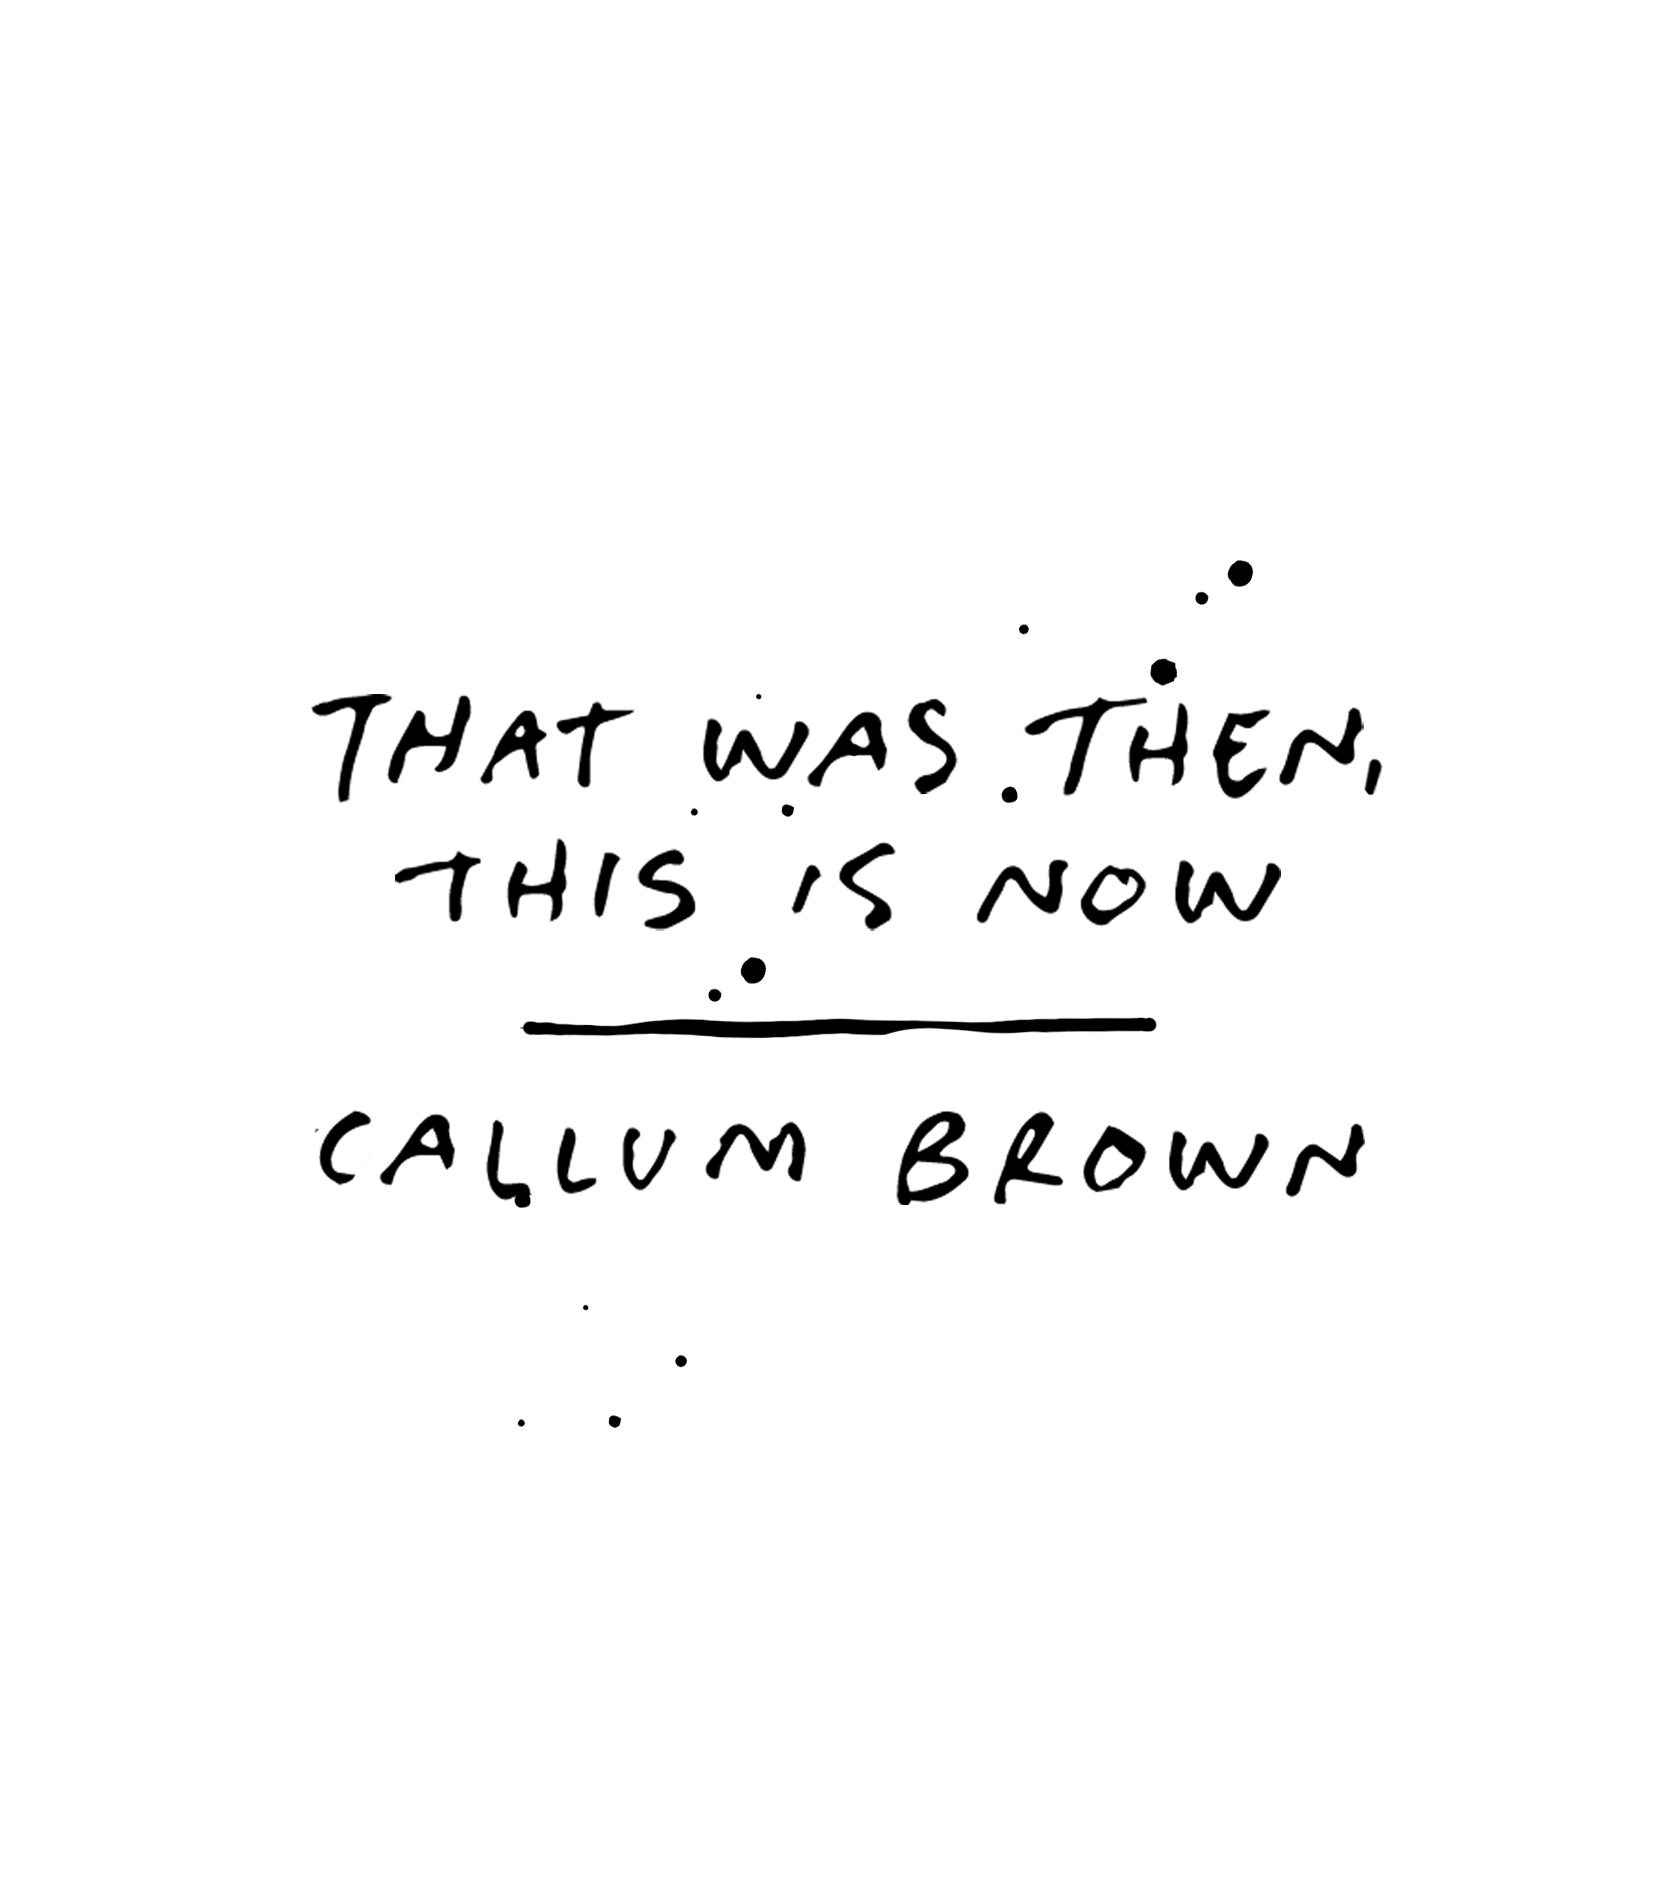 That was then, this is now: Callum Browne